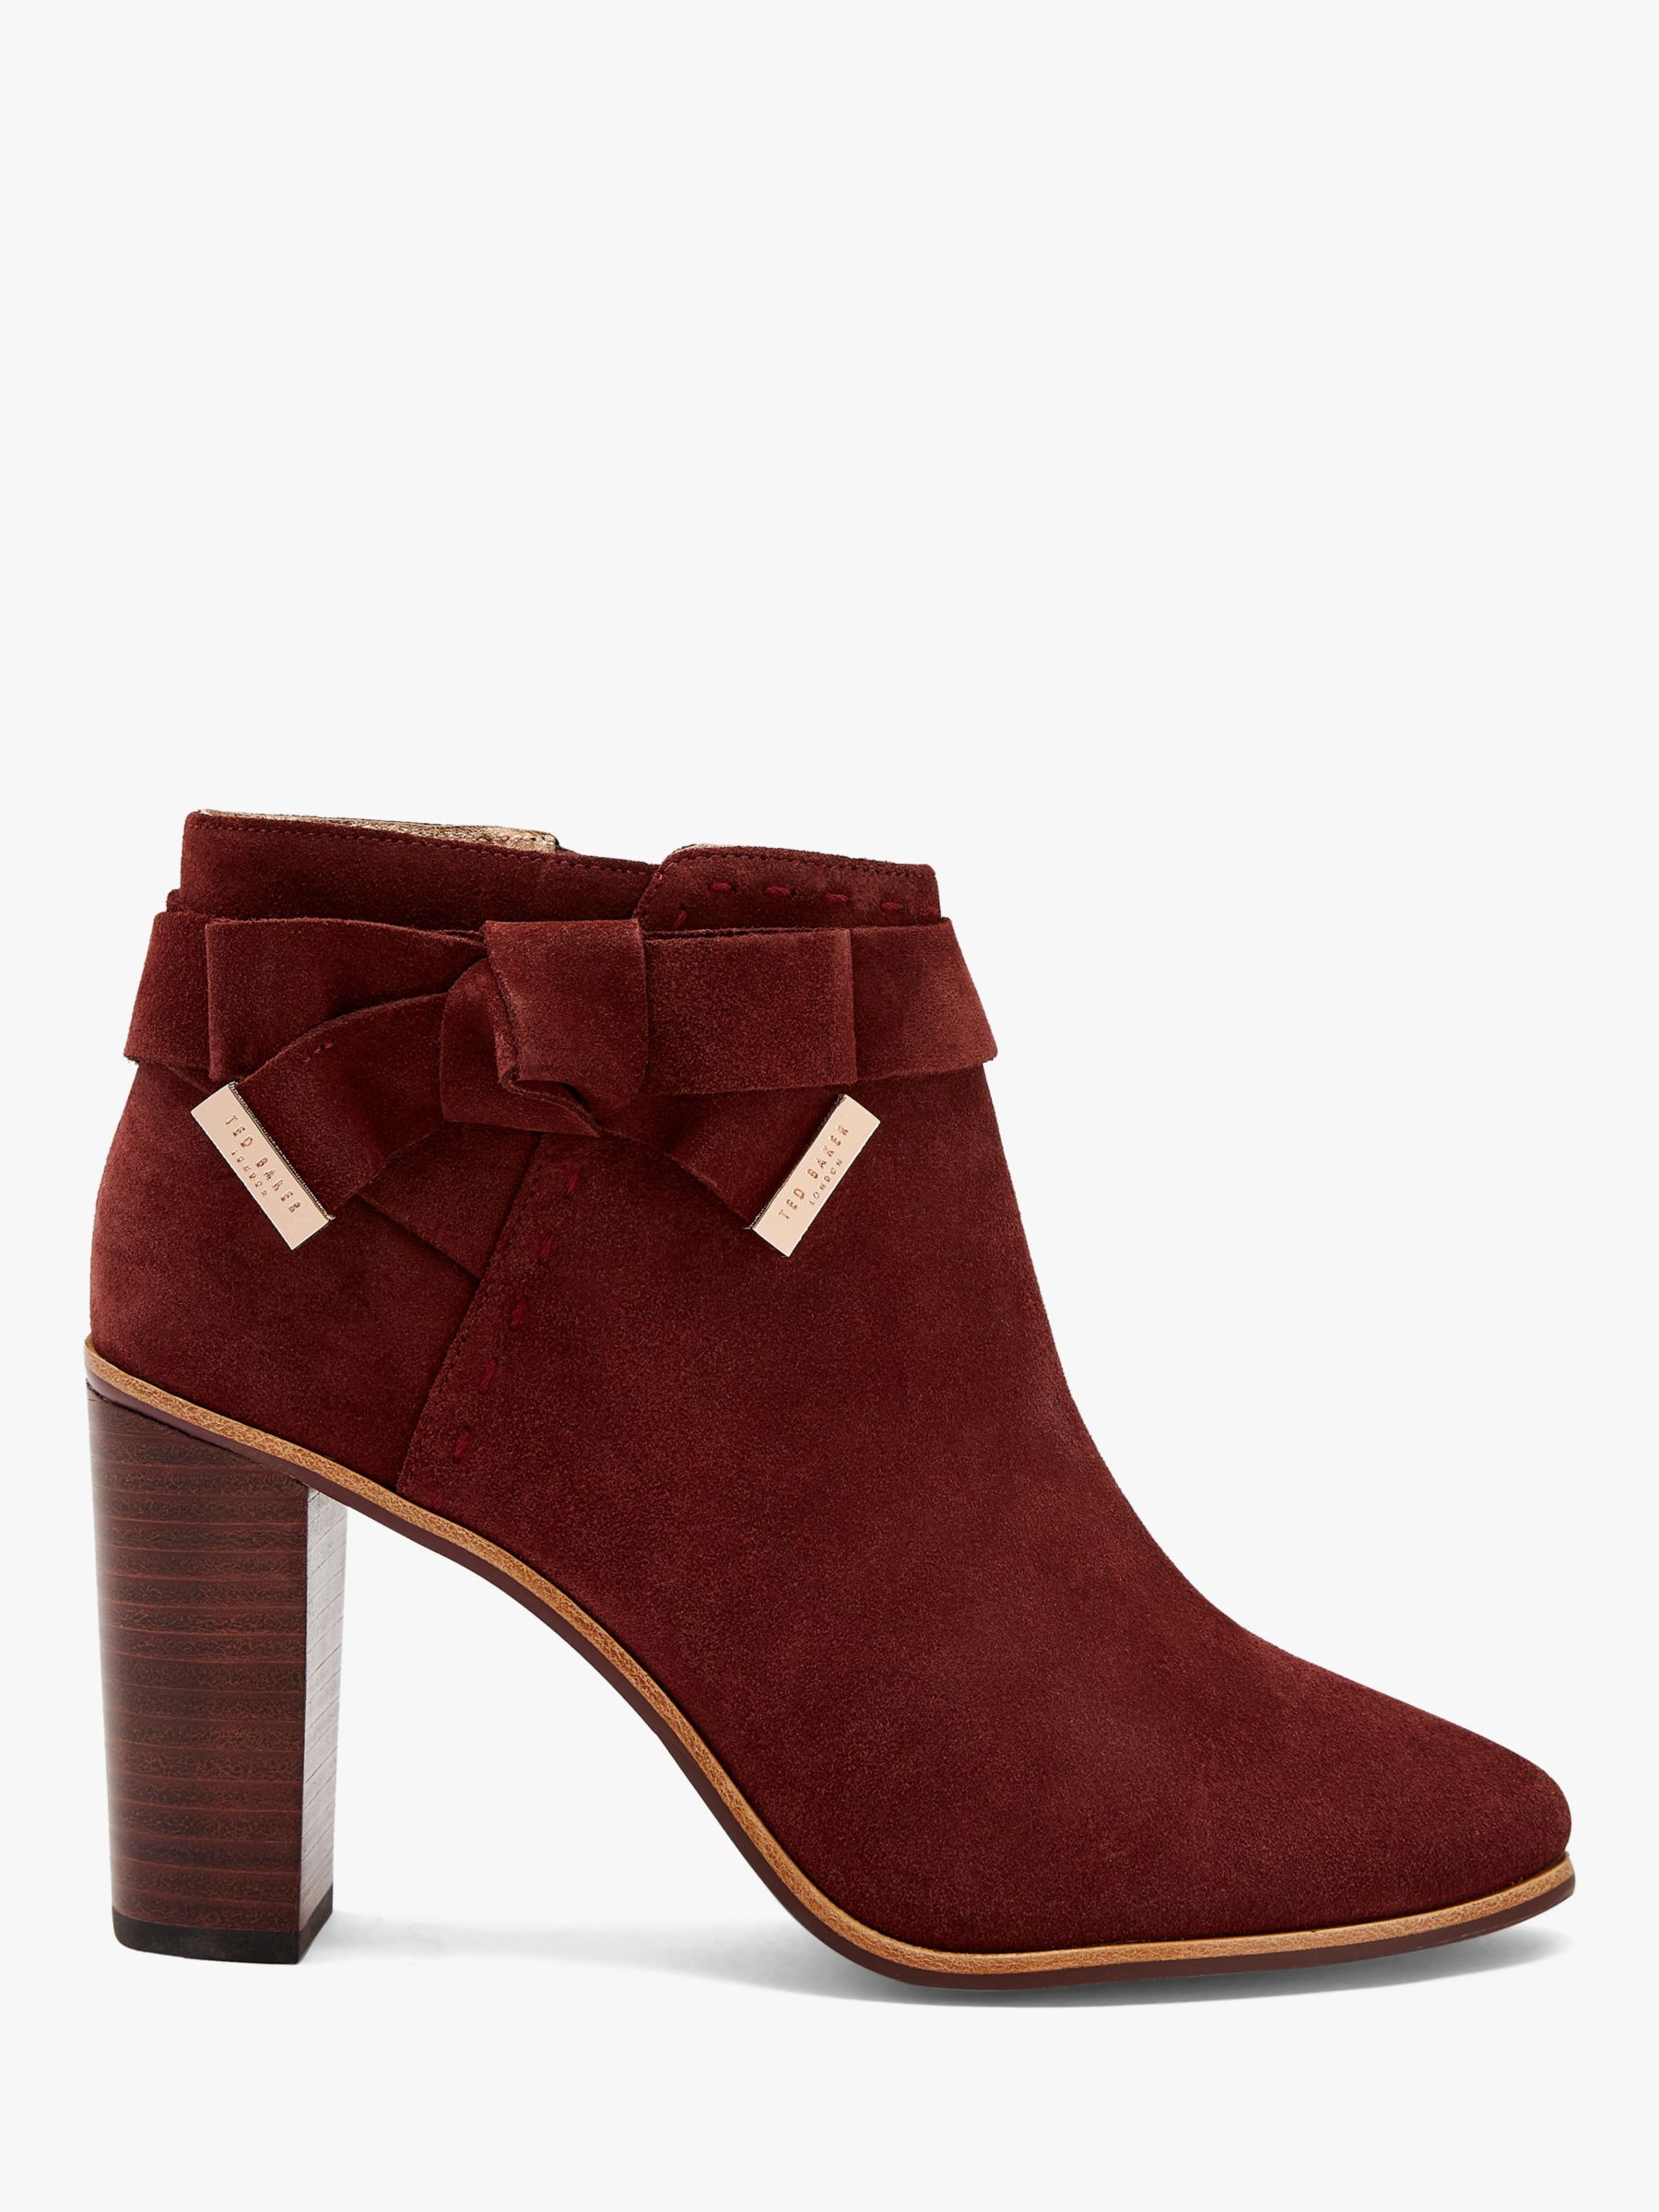 Ted Baker Anaedi Suede Ankle Boots